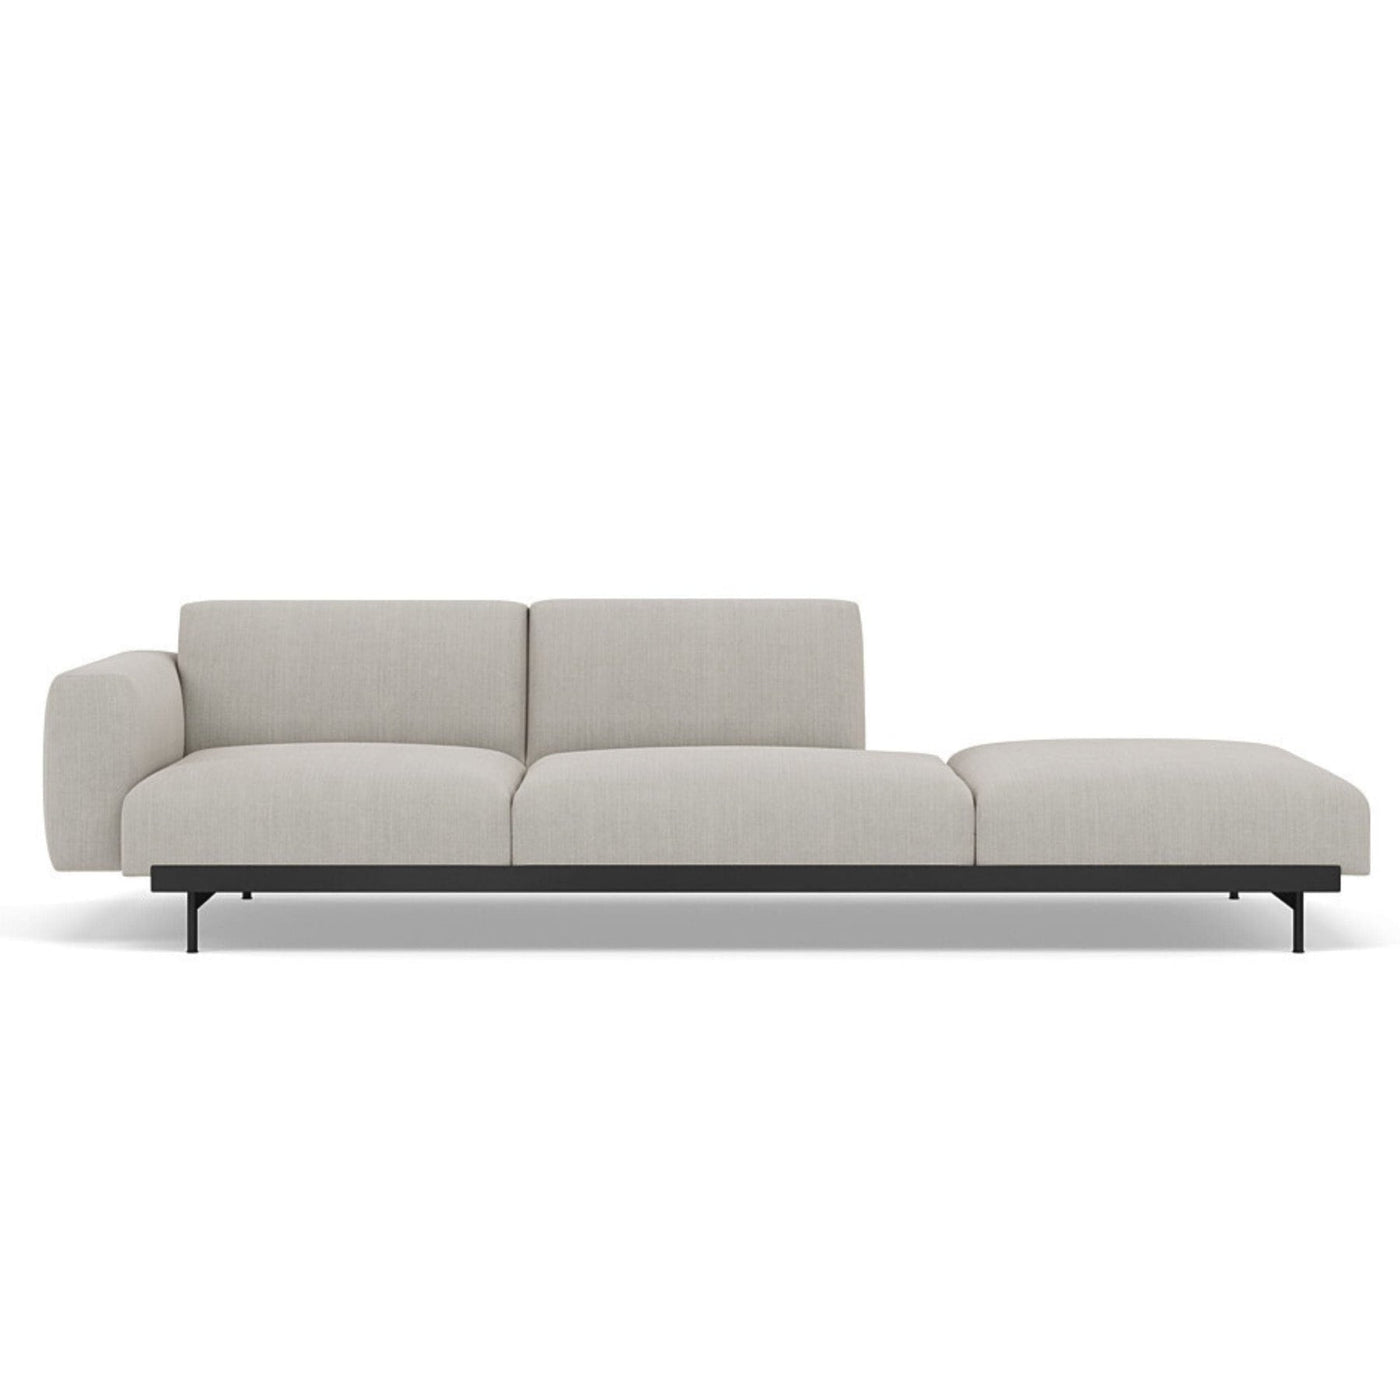 Muuto In Situ Modular 3 Seater Sofa, configuration 5. Made to order from someday designs. #colour_fiord-201